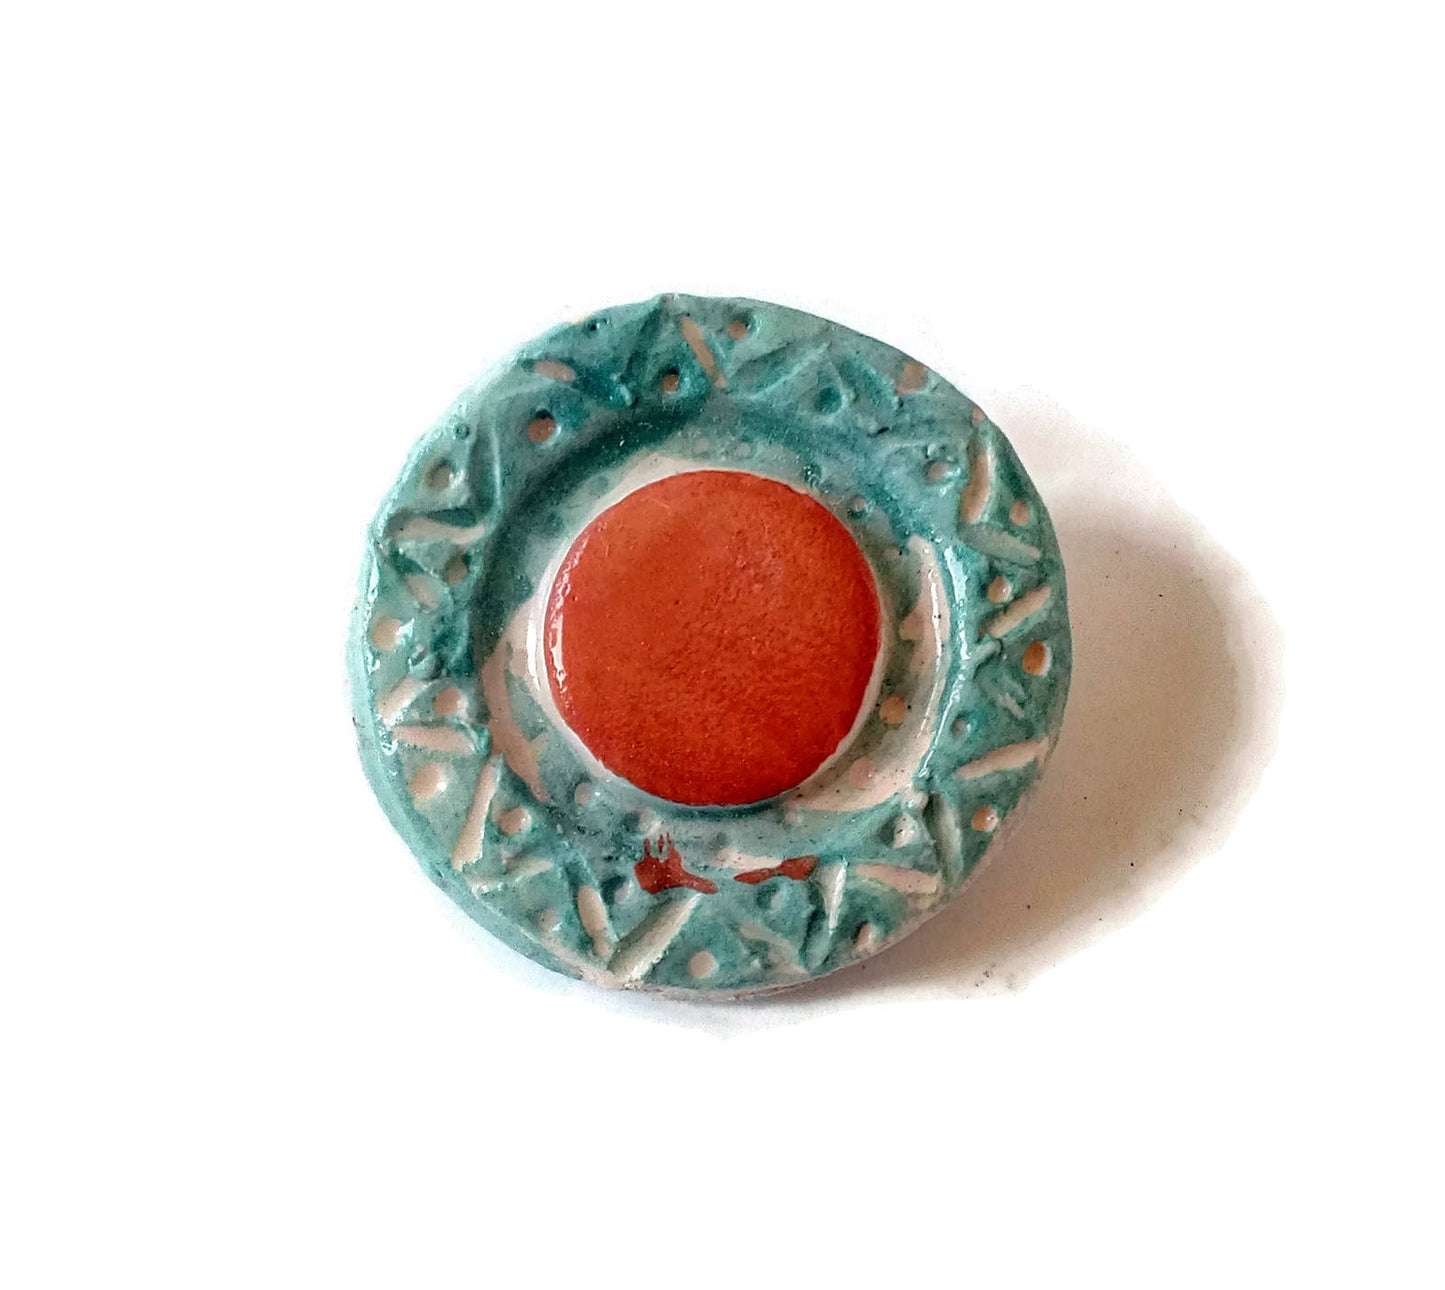 Hand Painted Brooch with Vintage Style, Hanmade Ceramic Jewelry Brooches For Women, Mom Birthday Gift From Daughter, Christmas Gifts - Ceramica Ana Rafael